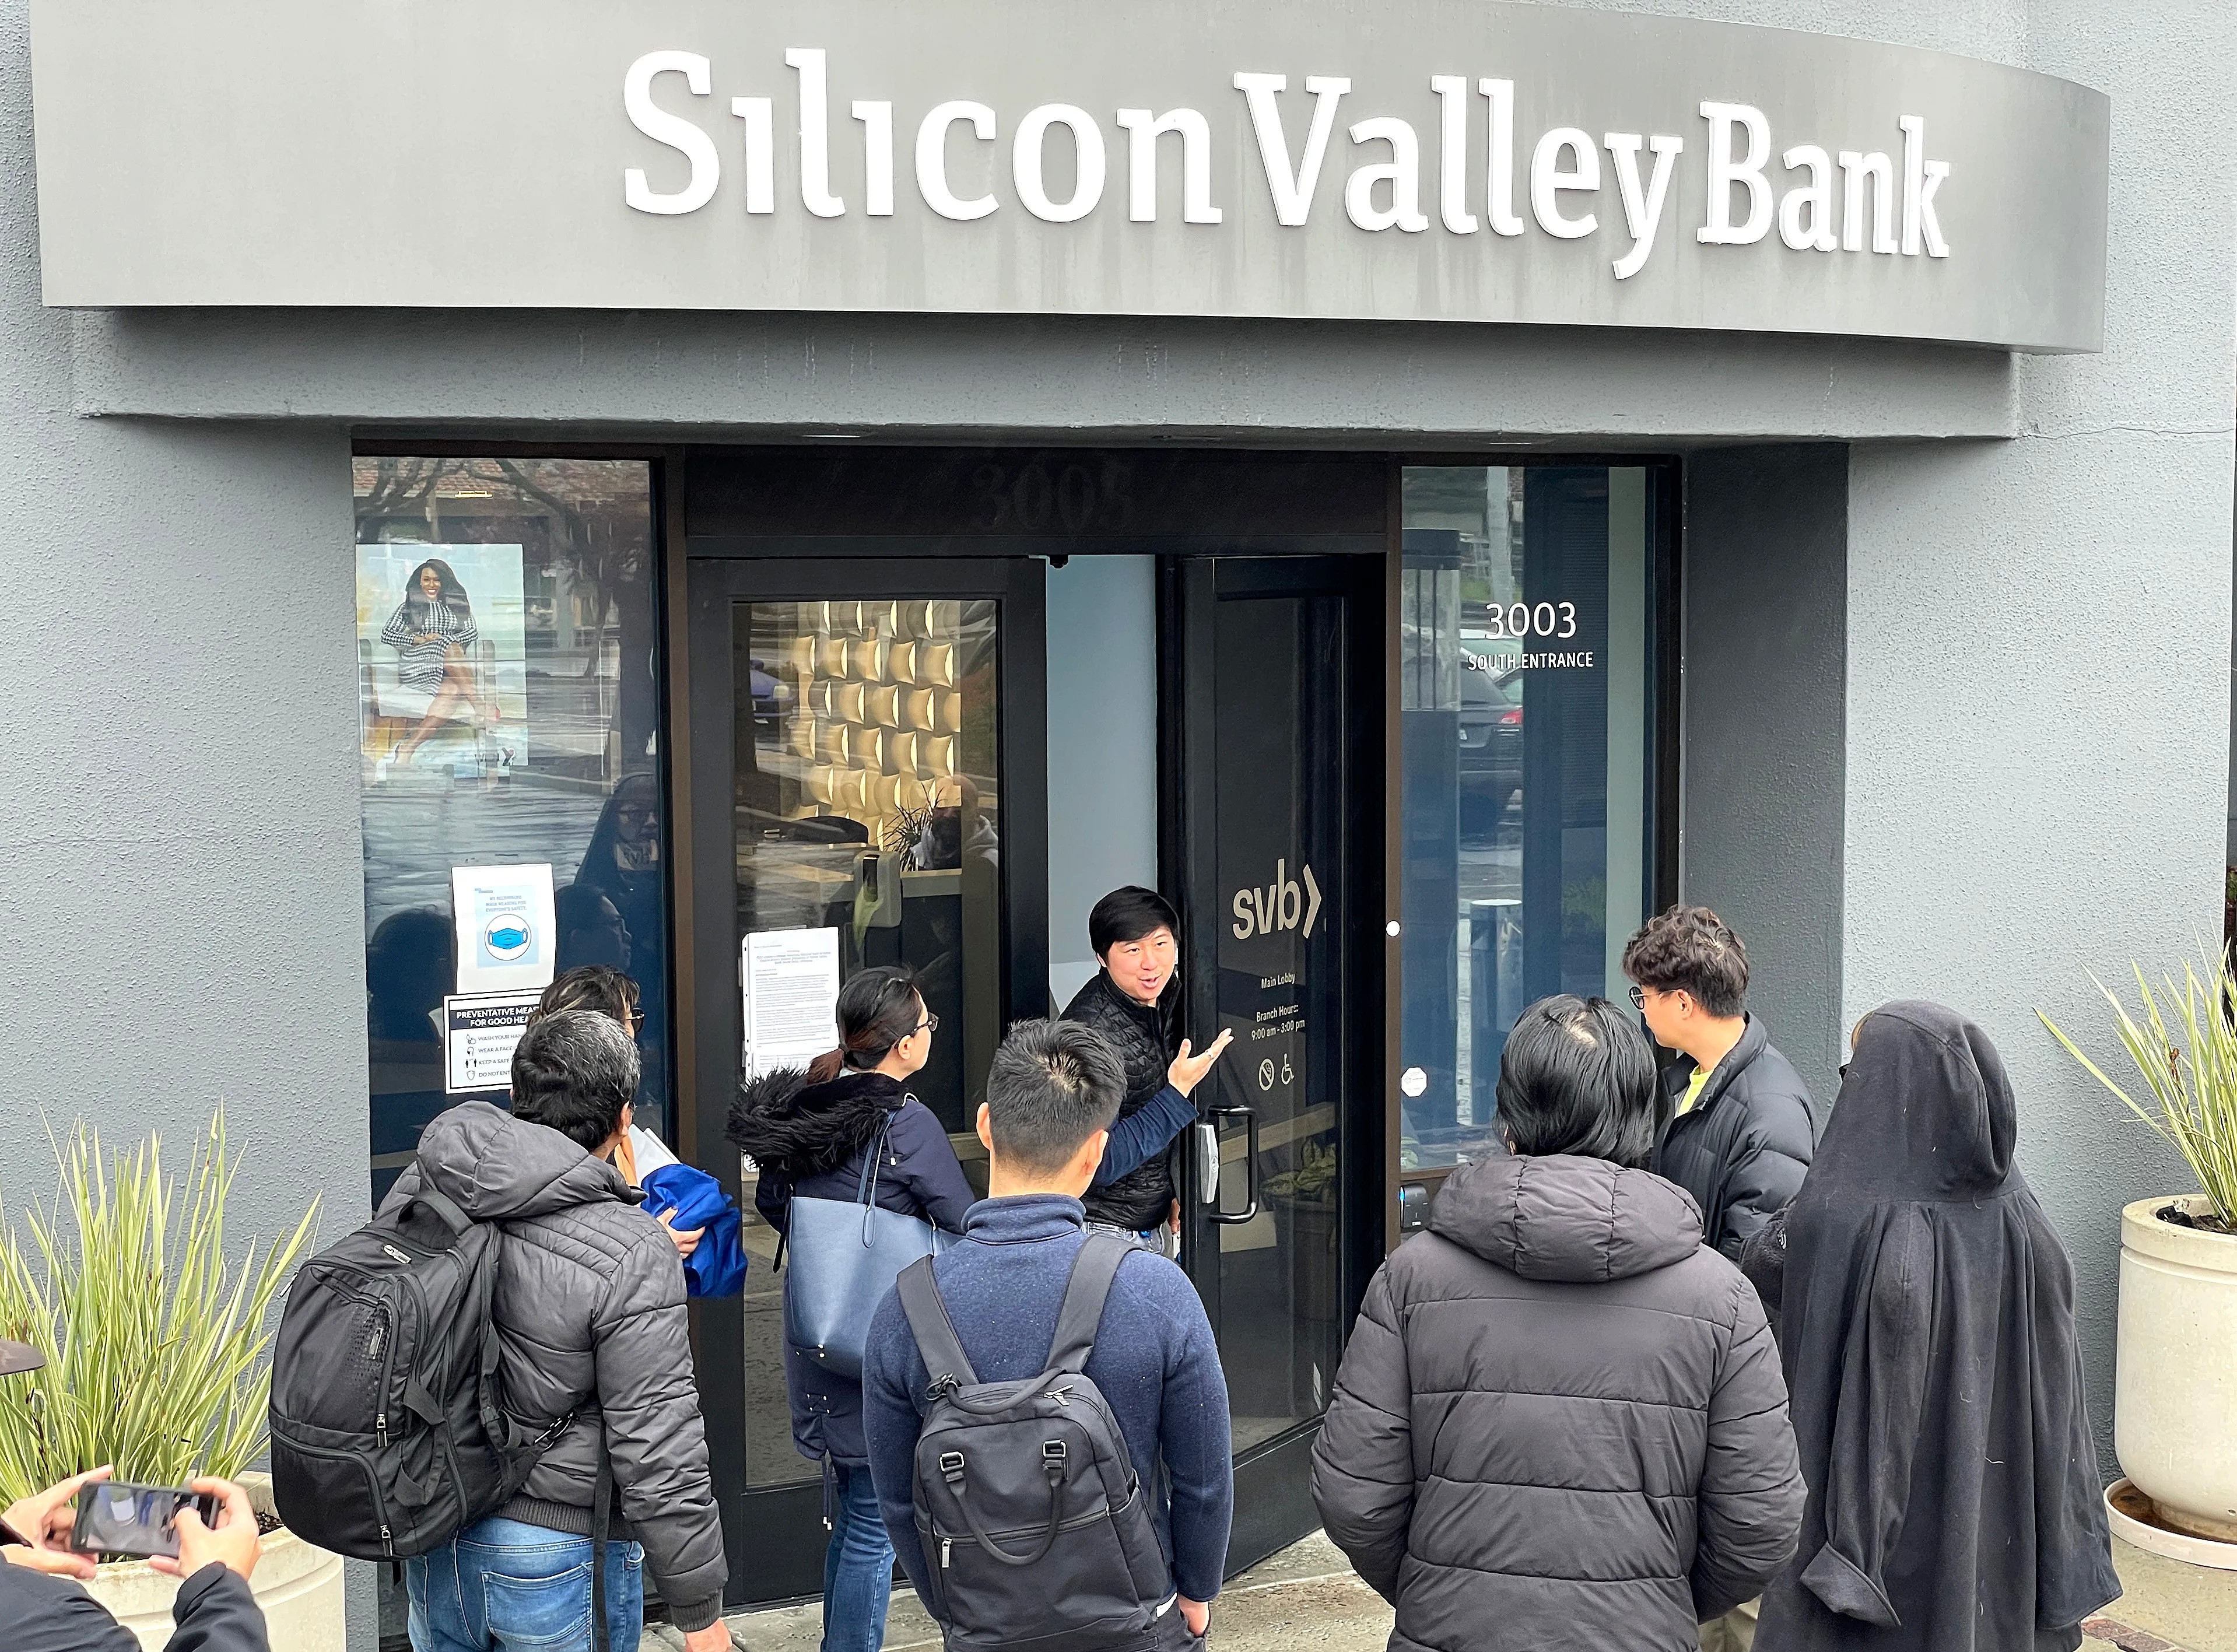 3 American banks collapsed in one week : Silvergate, Silicon Valley and Signature bank closed in USA